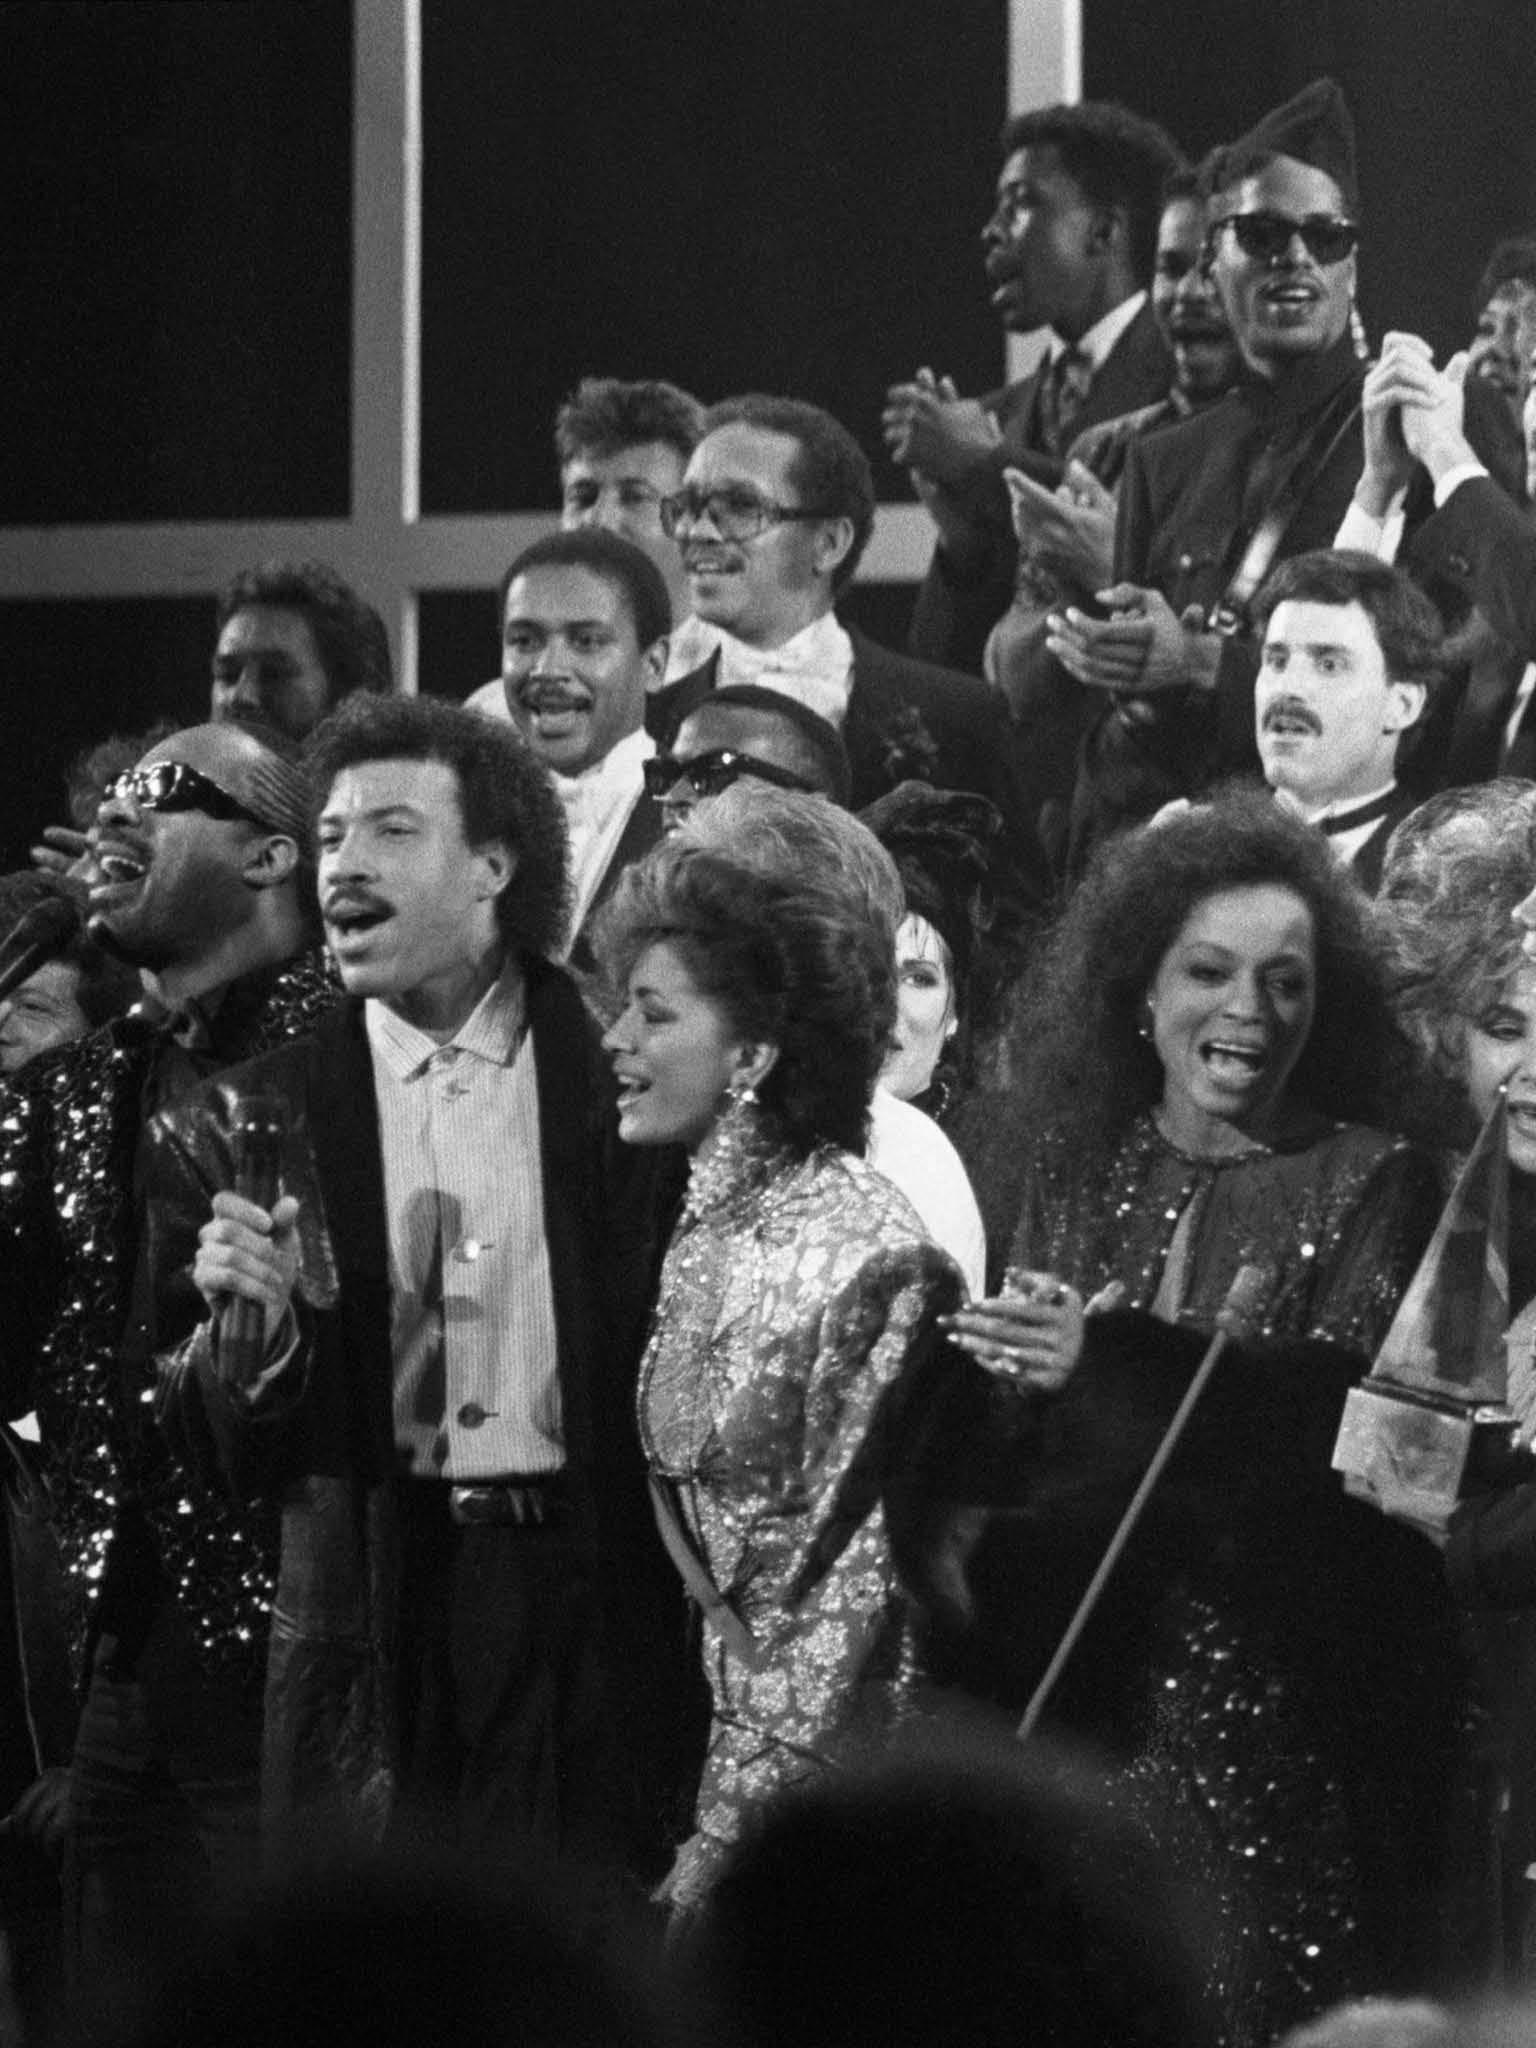 A variety of music and movie stars sing "We Are The World" a song written to benefit famine victims in Ethiopia. Across the front row stands: Stevie Wonder, Lionel Richie, Sheila E., Diana Ross, Elizabeth Taylor, Michael Jackson, Smokey Robinson, Kim Carnes, Michael Douglas, and Janet Jackson., Image: 15371183, License: Rights-managed, Restrictions: , Model Release: no, Credit line: Profimedia, Corbis